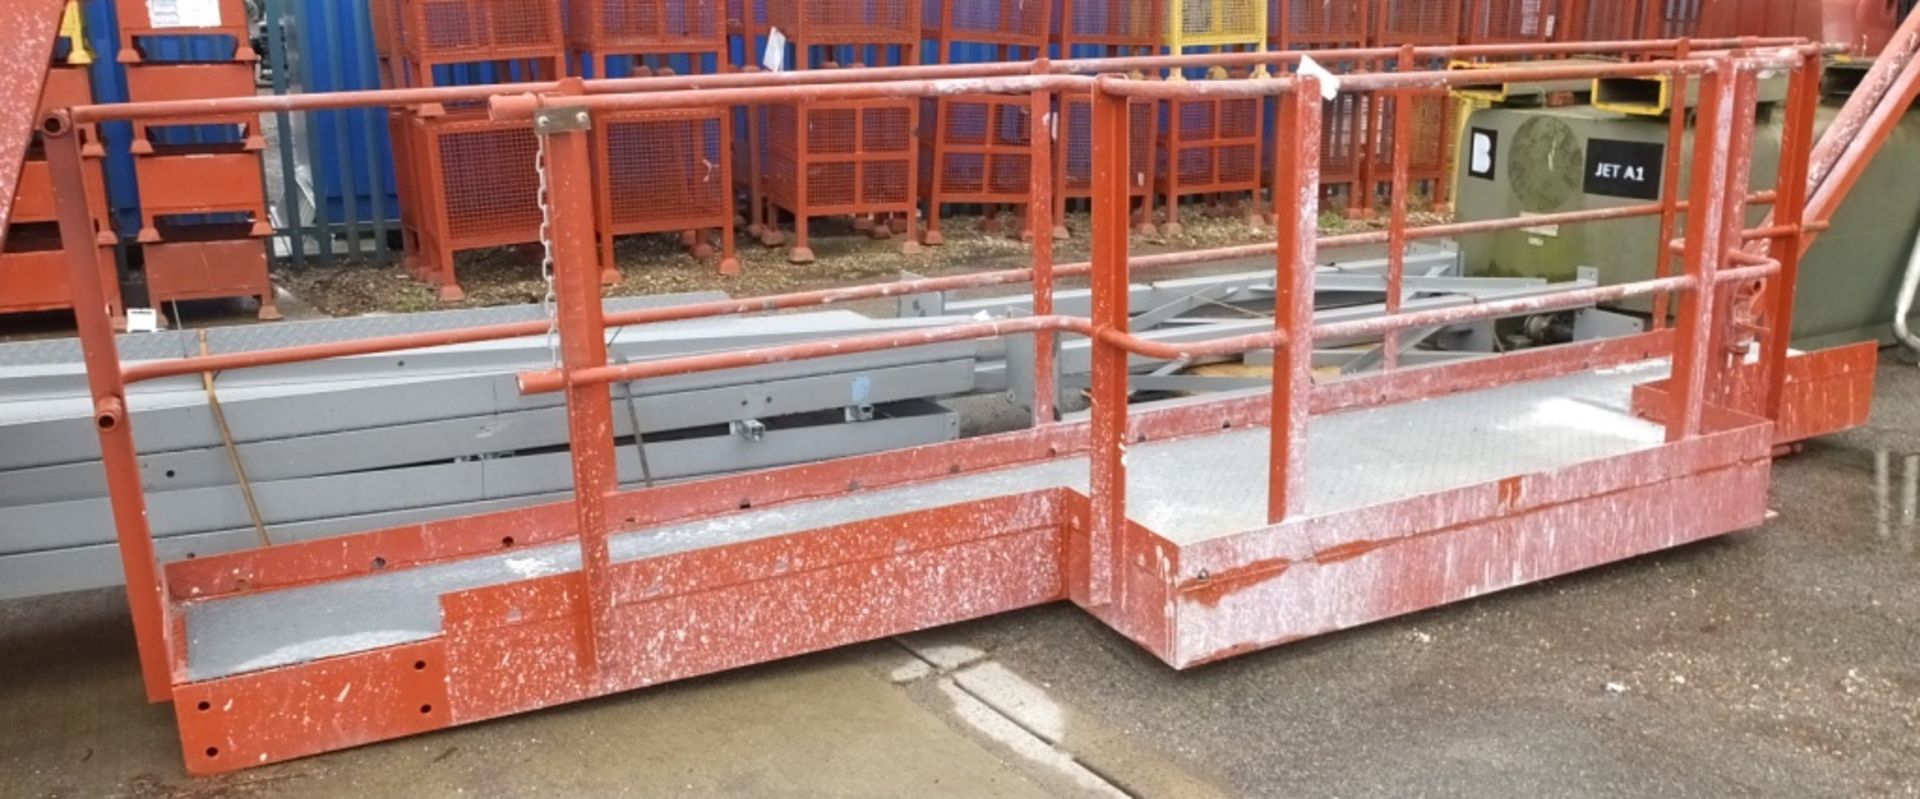 Walkway assembly - frames, legs, handrails - Full lorry load AT LEAST - Please note there - Image 8 of 13